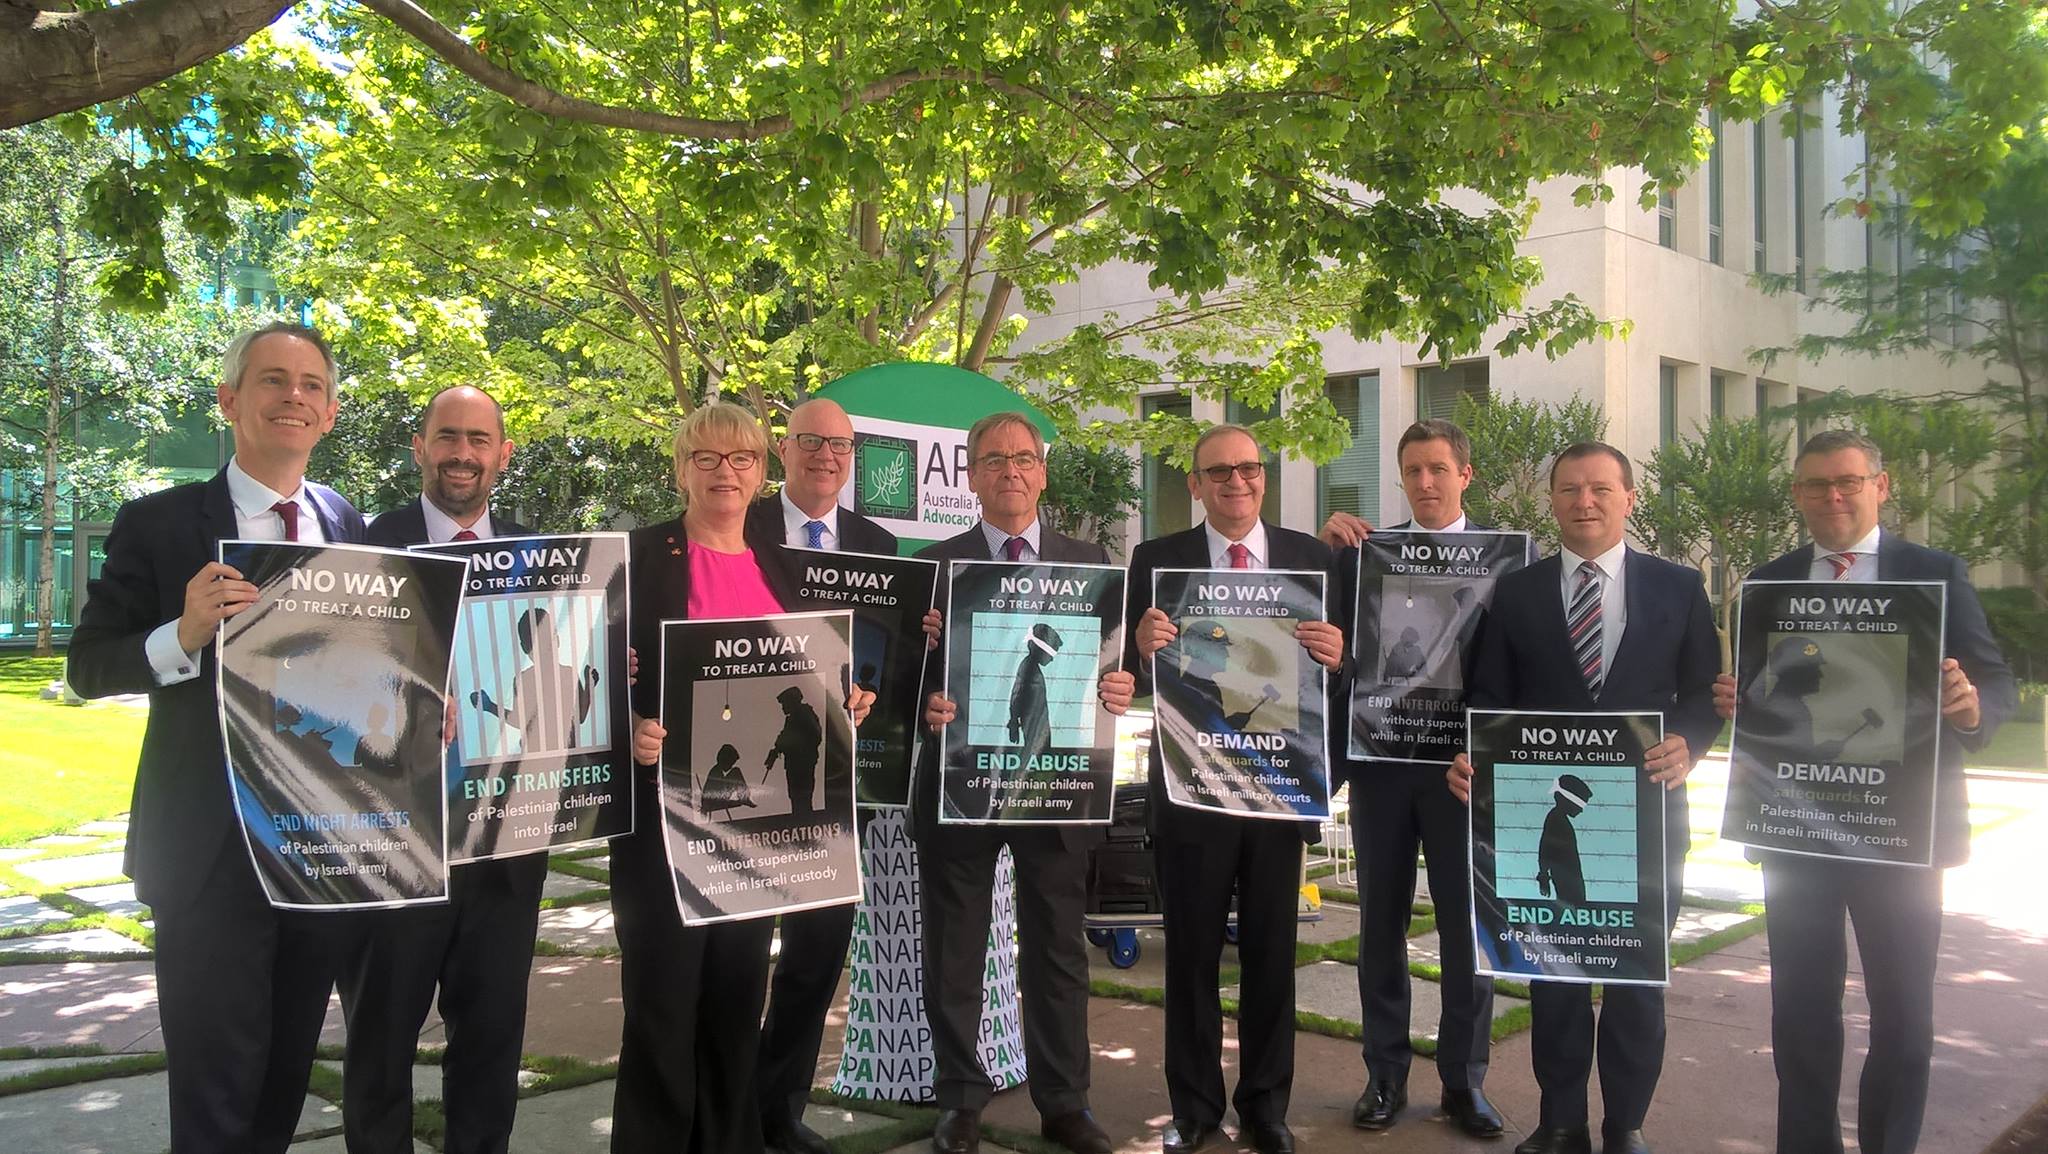 Politicians holding posters protesting the treatment of Palestinian children by the Israeli military